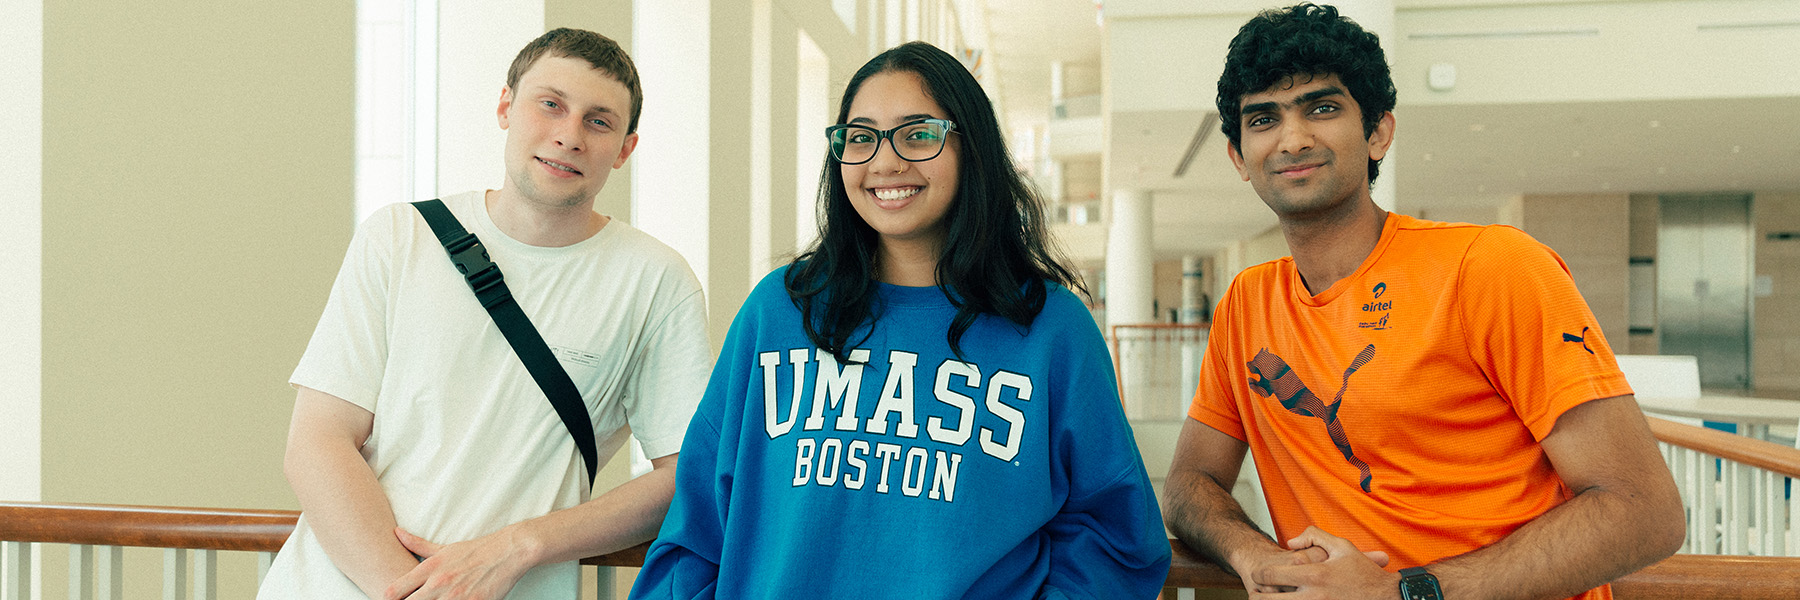 Three UMass Boston students, a woman and two men, smile in the Campus Center